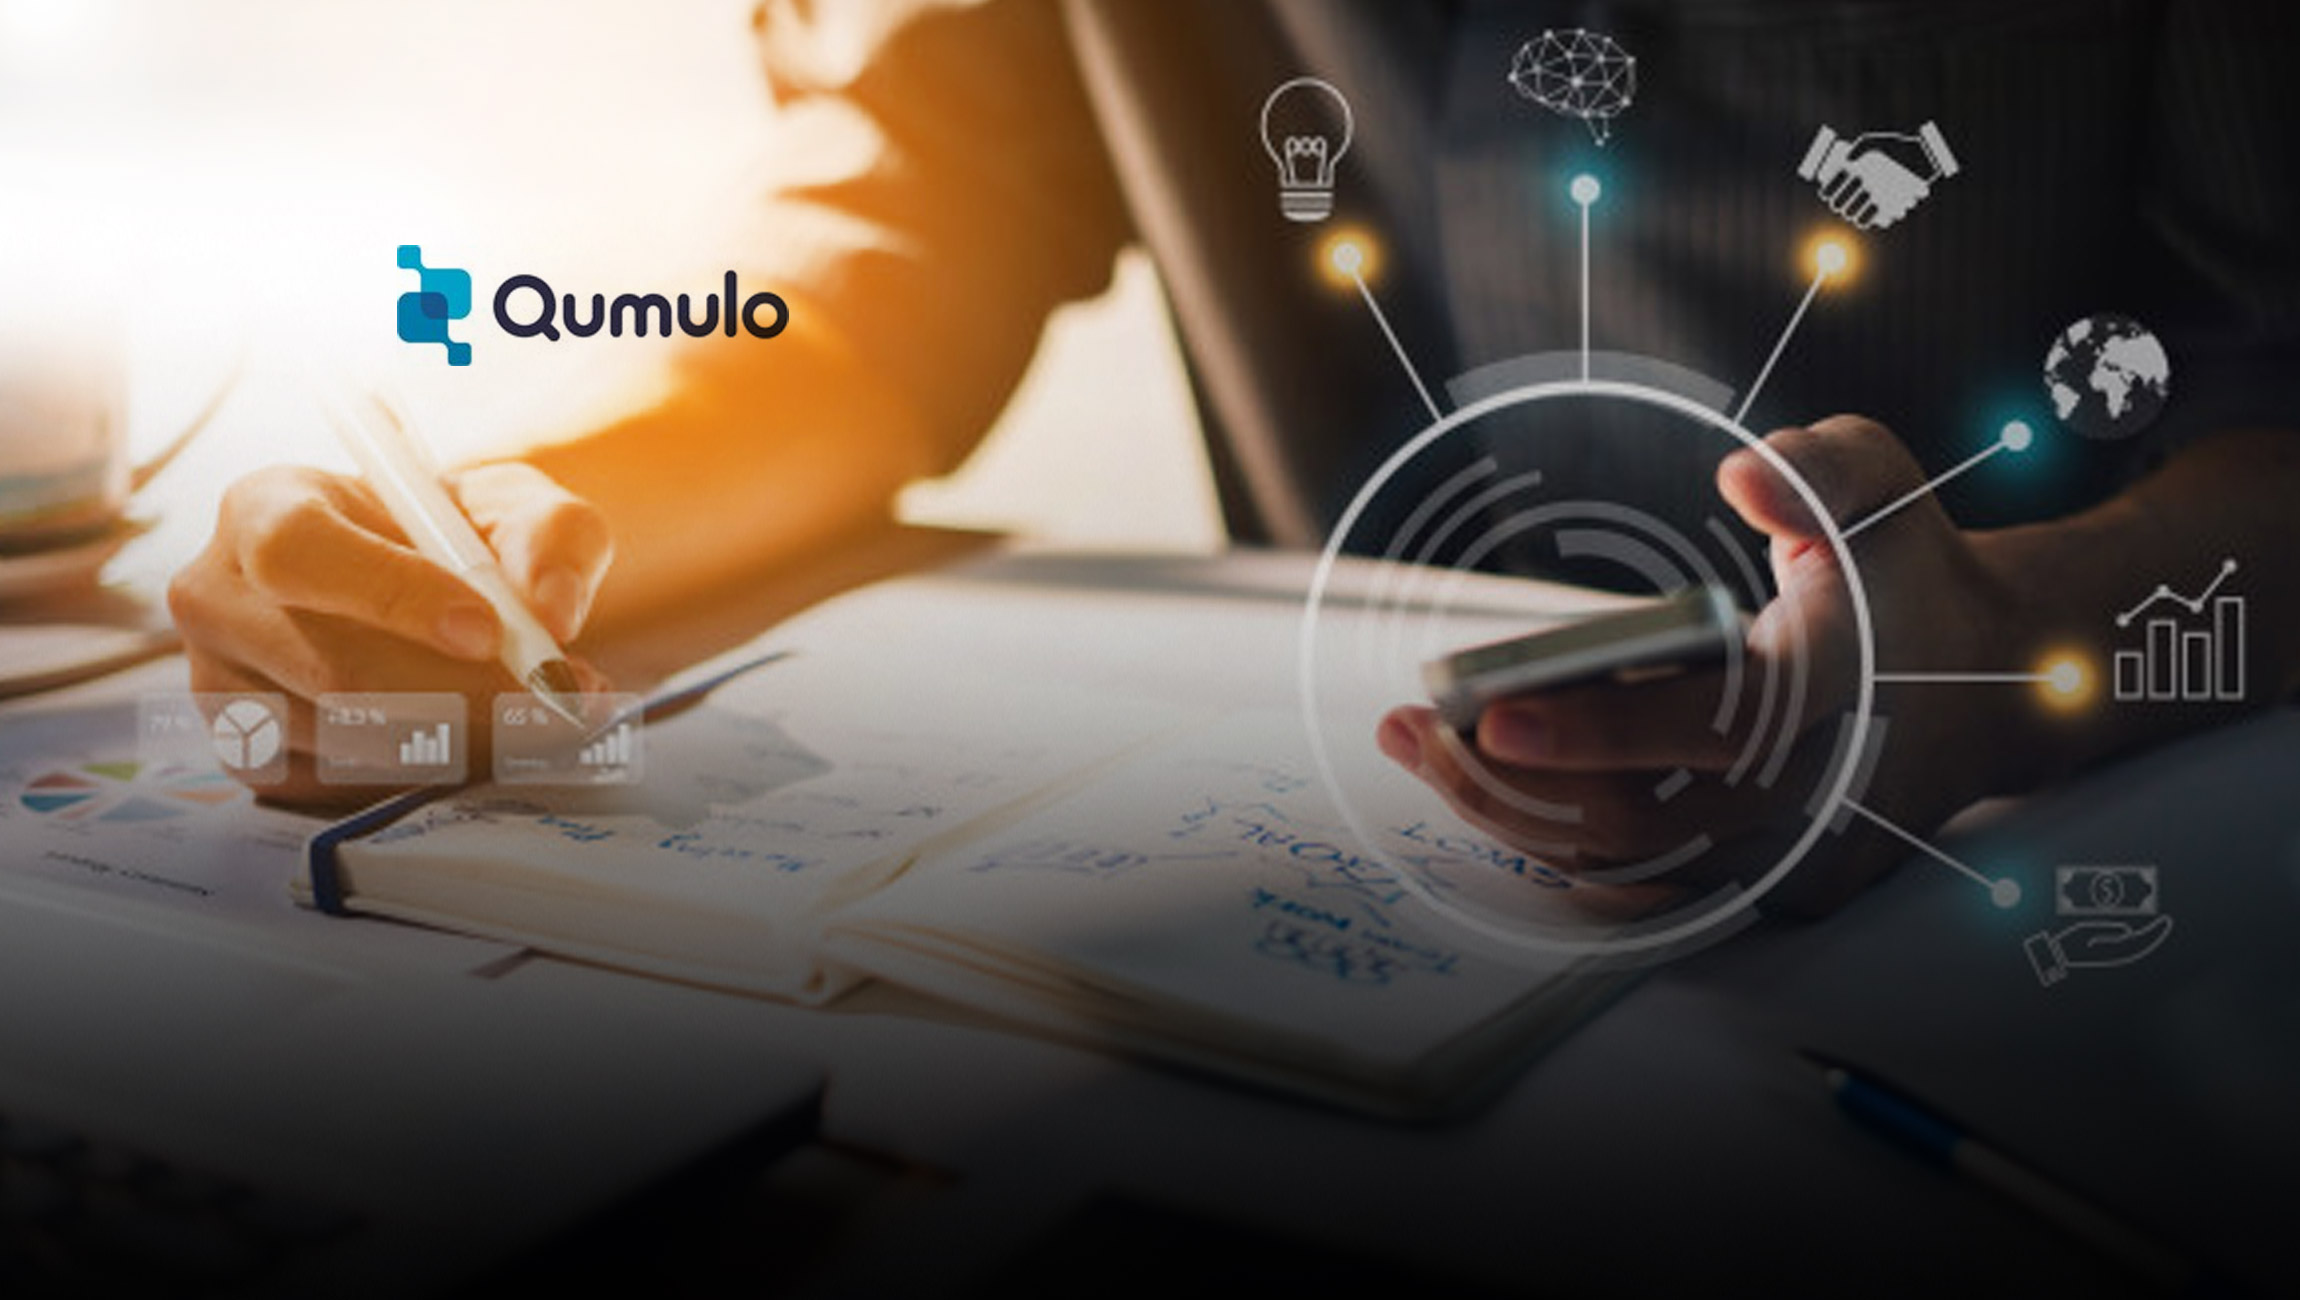 Qumulo Launches NFSv4.1 Support Enabling Seamless Collaboration Across Any Protocol